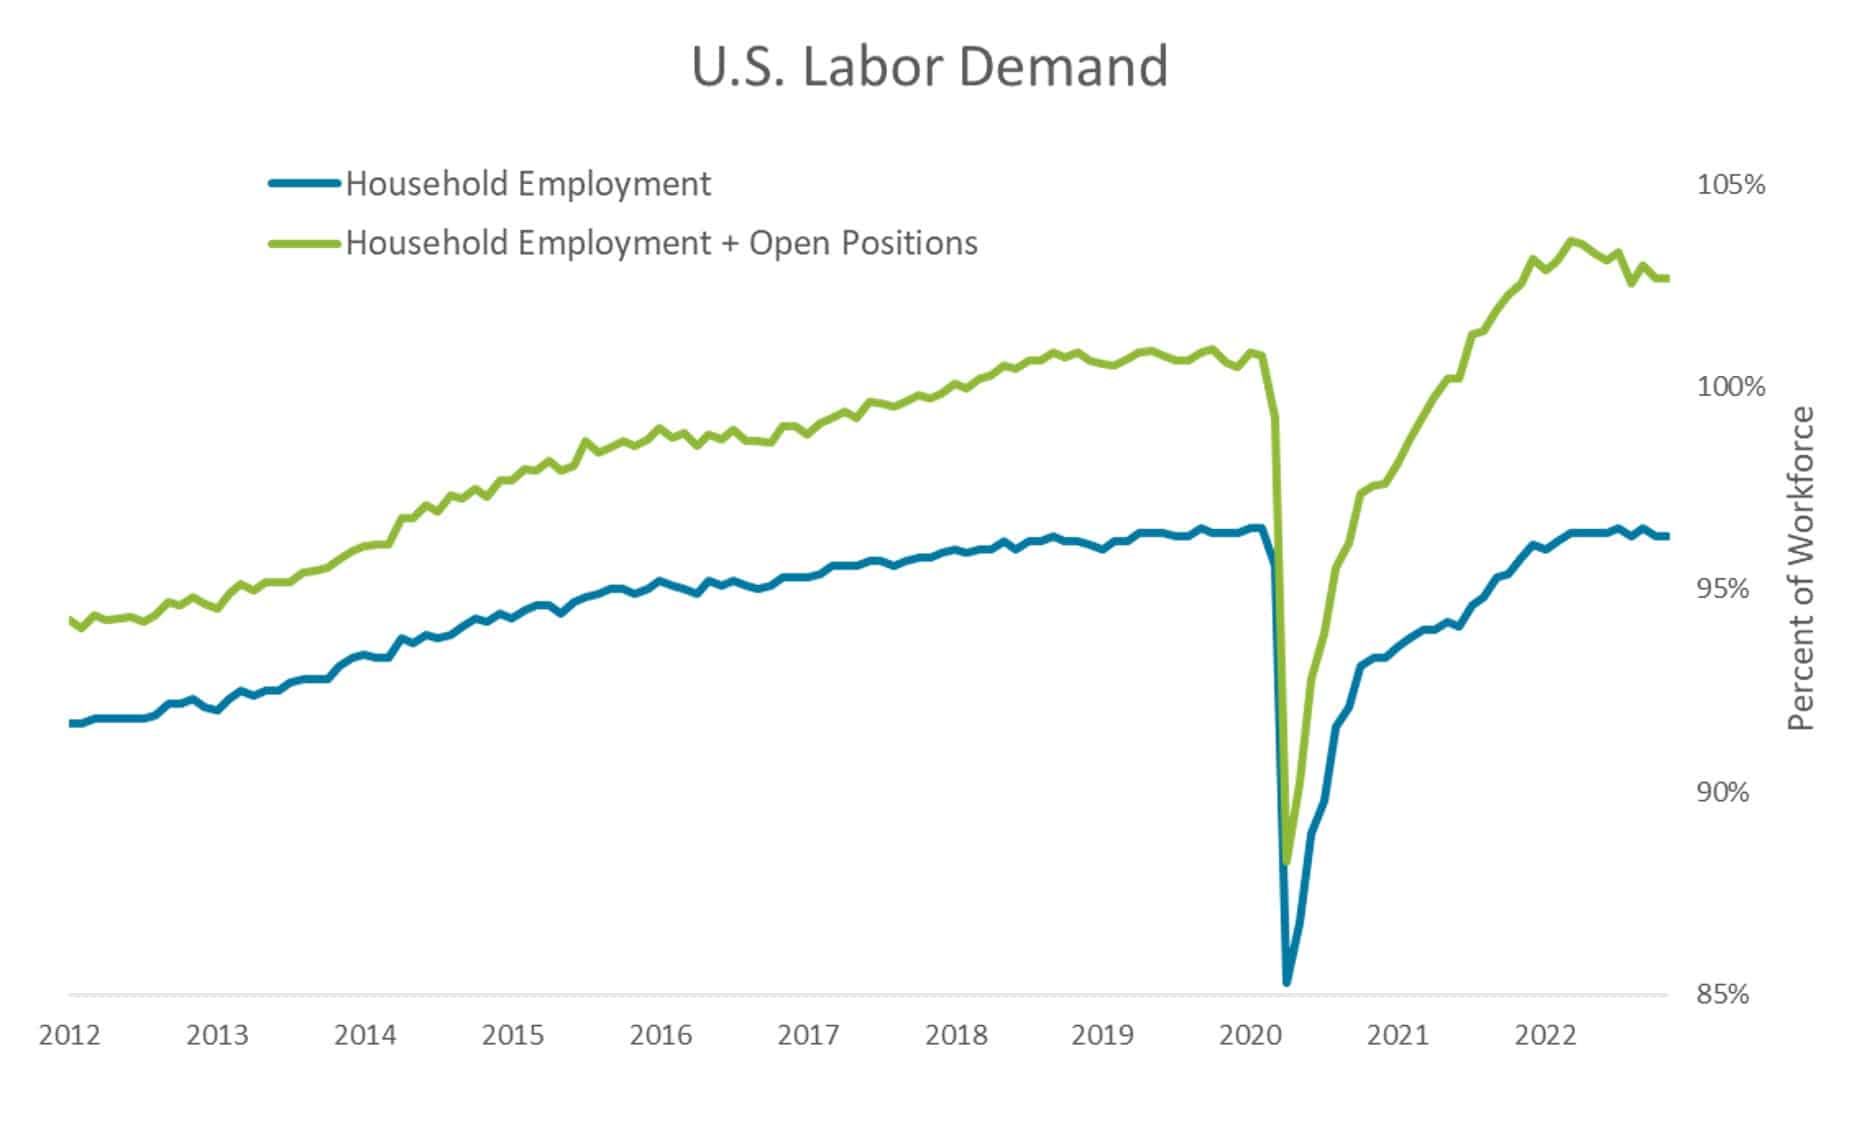 Chart showing U.S. Labor Demand over time